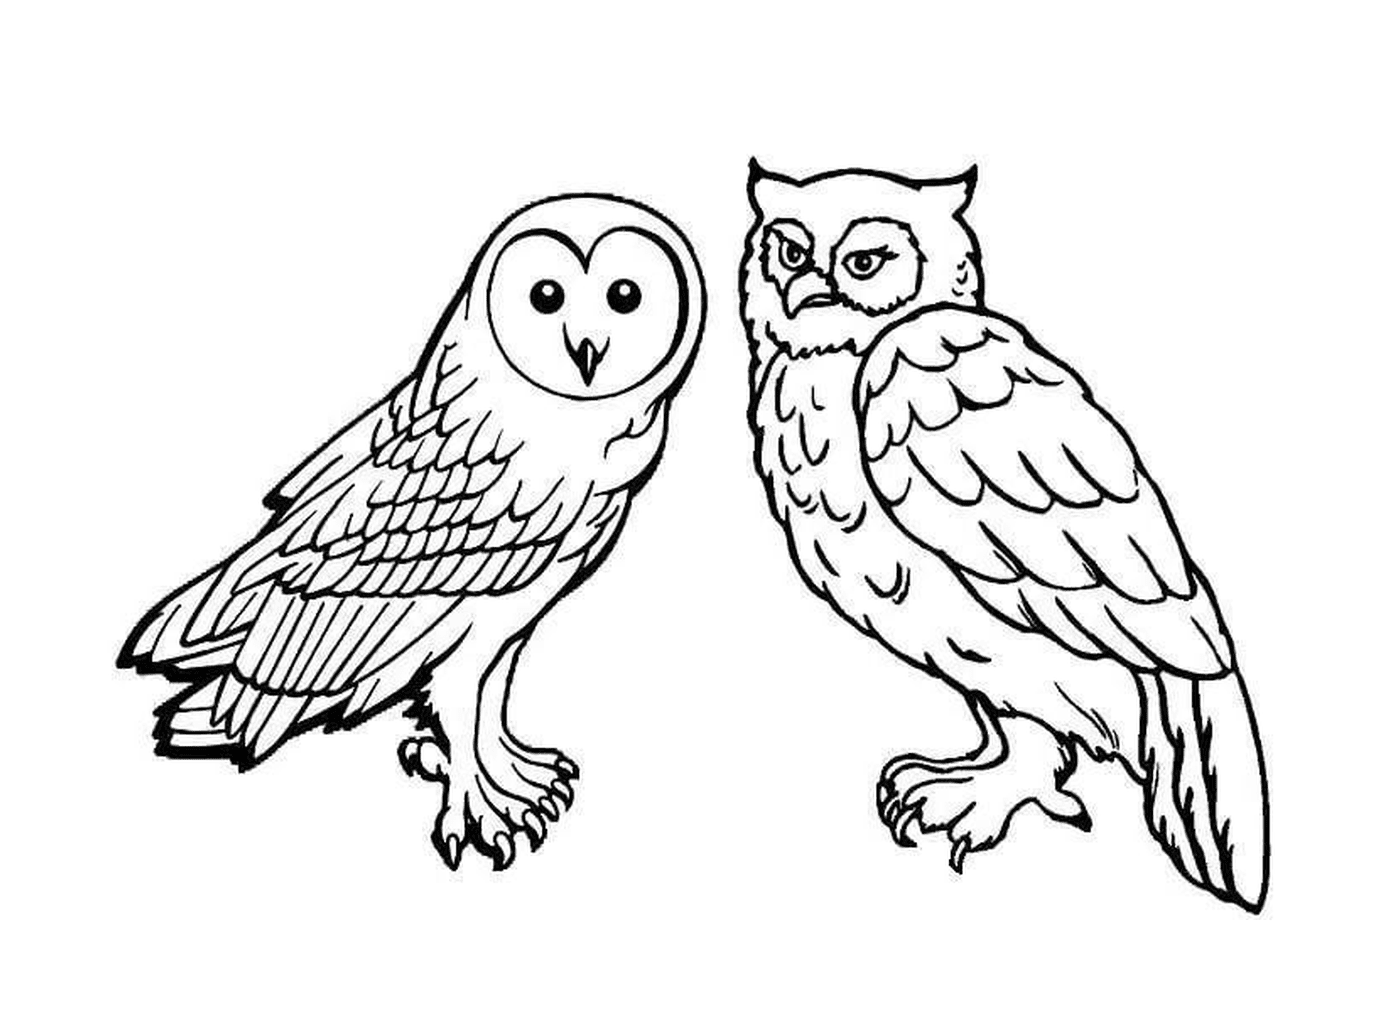  Owl and owl of the same family 